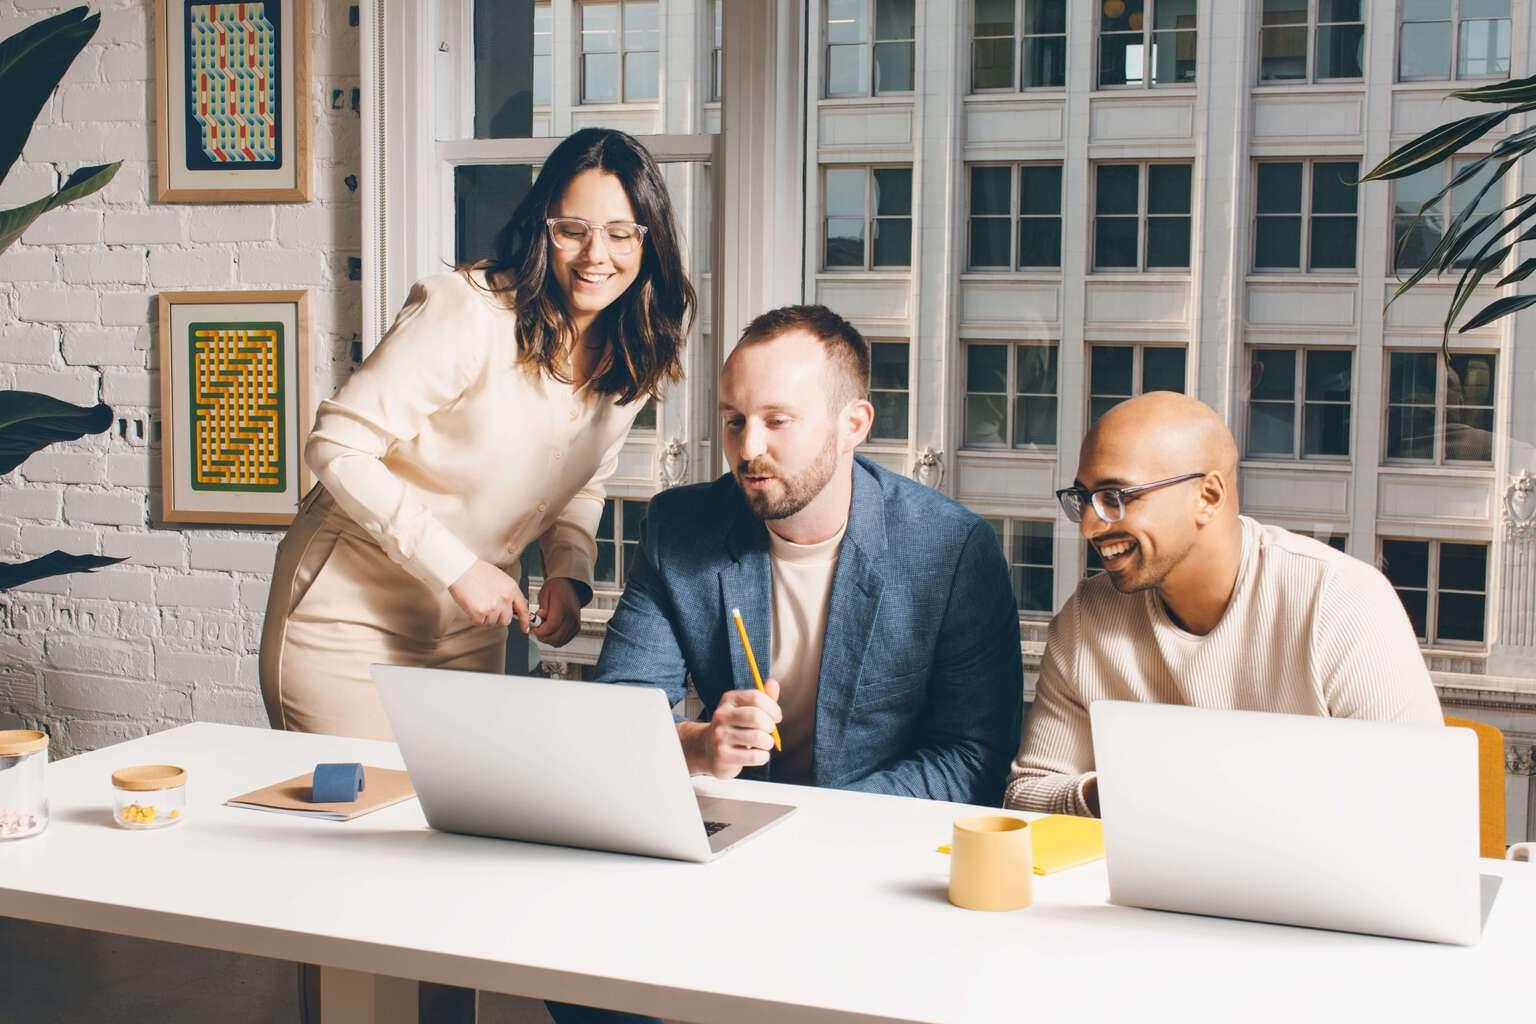 Image showing three coworkers collaborating around one person's laptop in an office environment